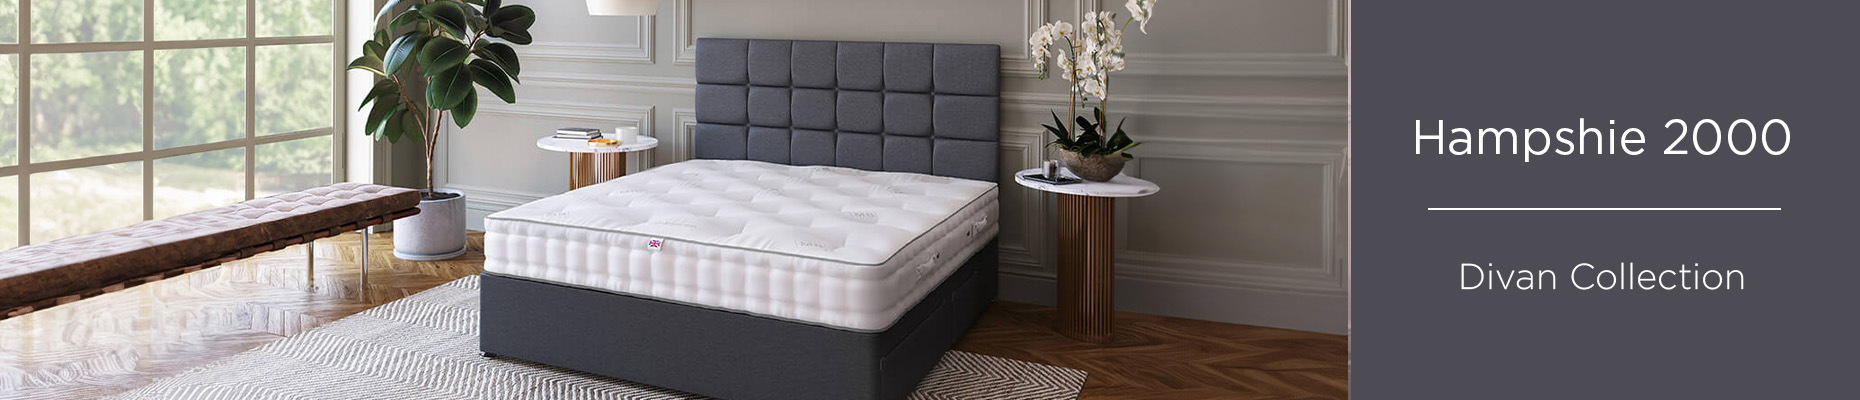 Hampshire Supreme 2000 Divan collection from Sealy at Forrest Furnishing